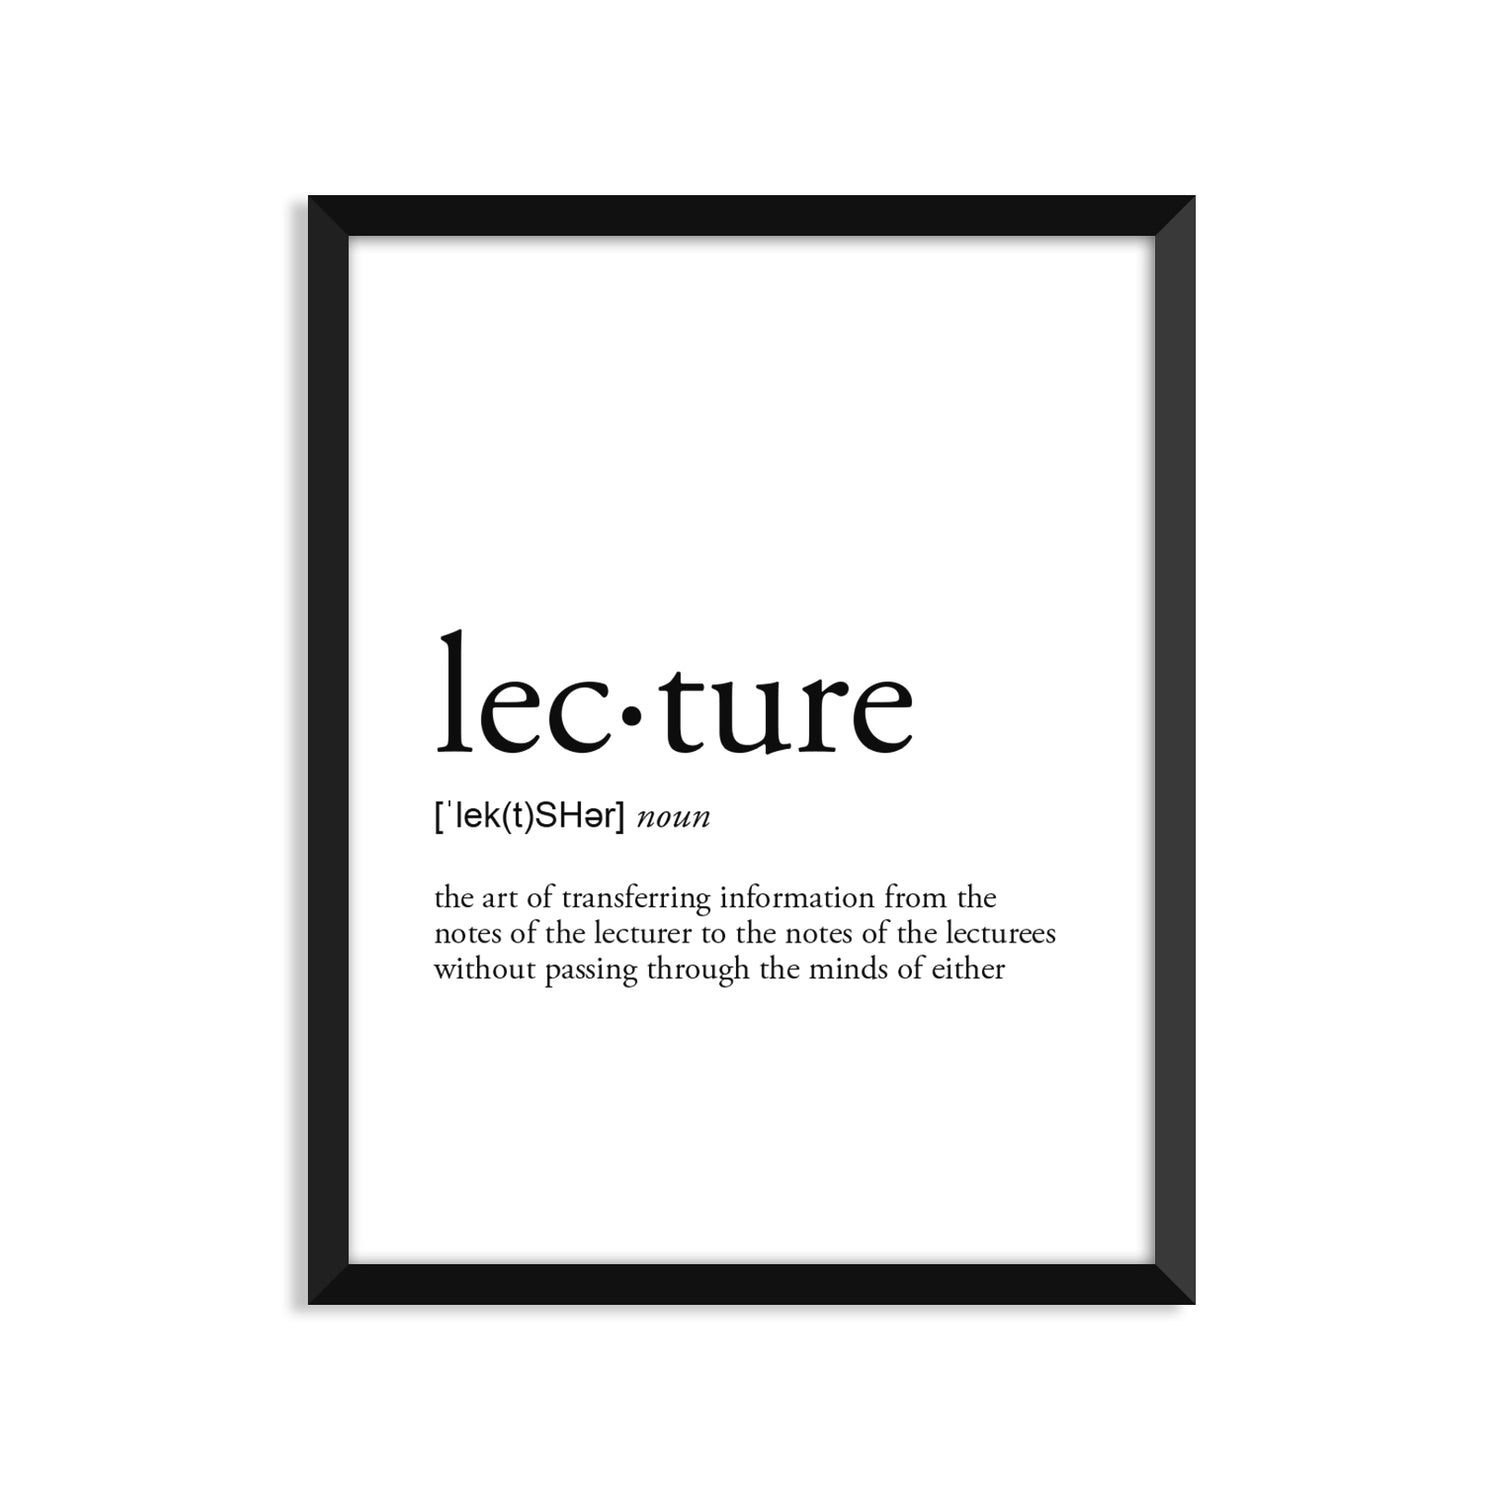 Lecture Definition - Unframed Art Print Or Greeting Card